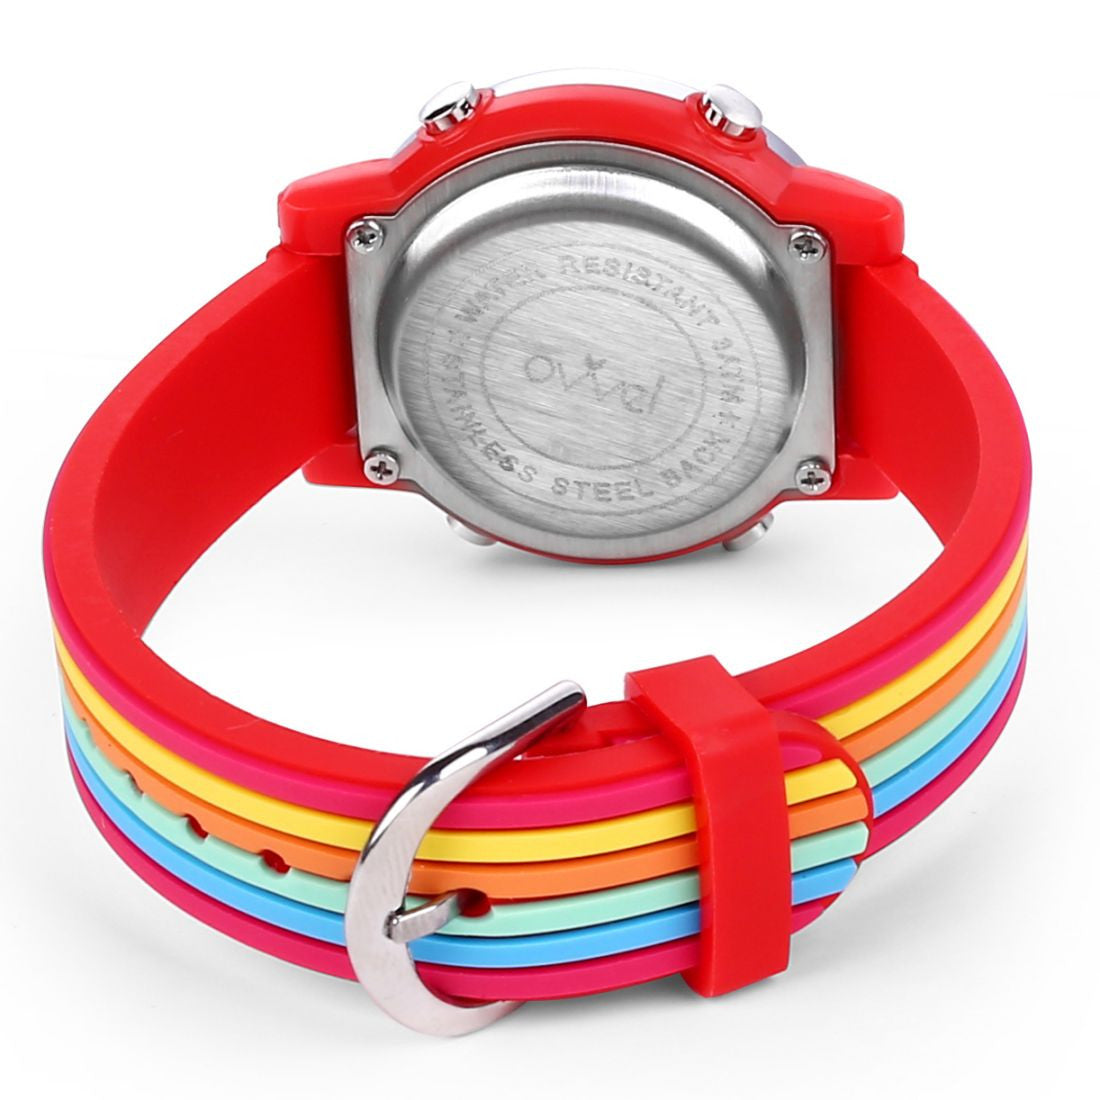 Girls Digital Sports Watch with many features - Colorful Stripes